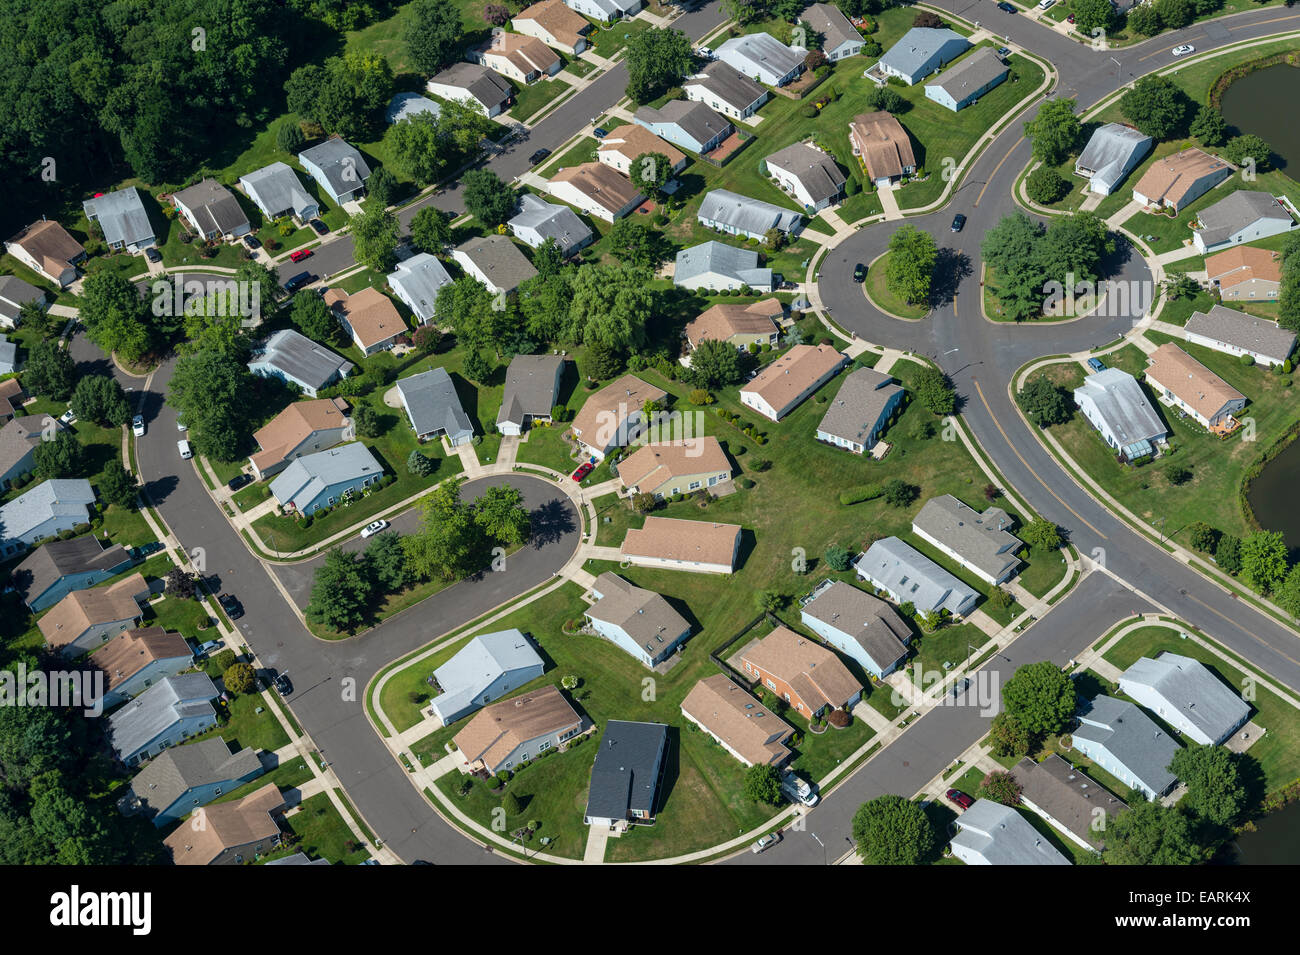 Aerial View Of Residential Houses In Suburban Neighborhood New Jersey 